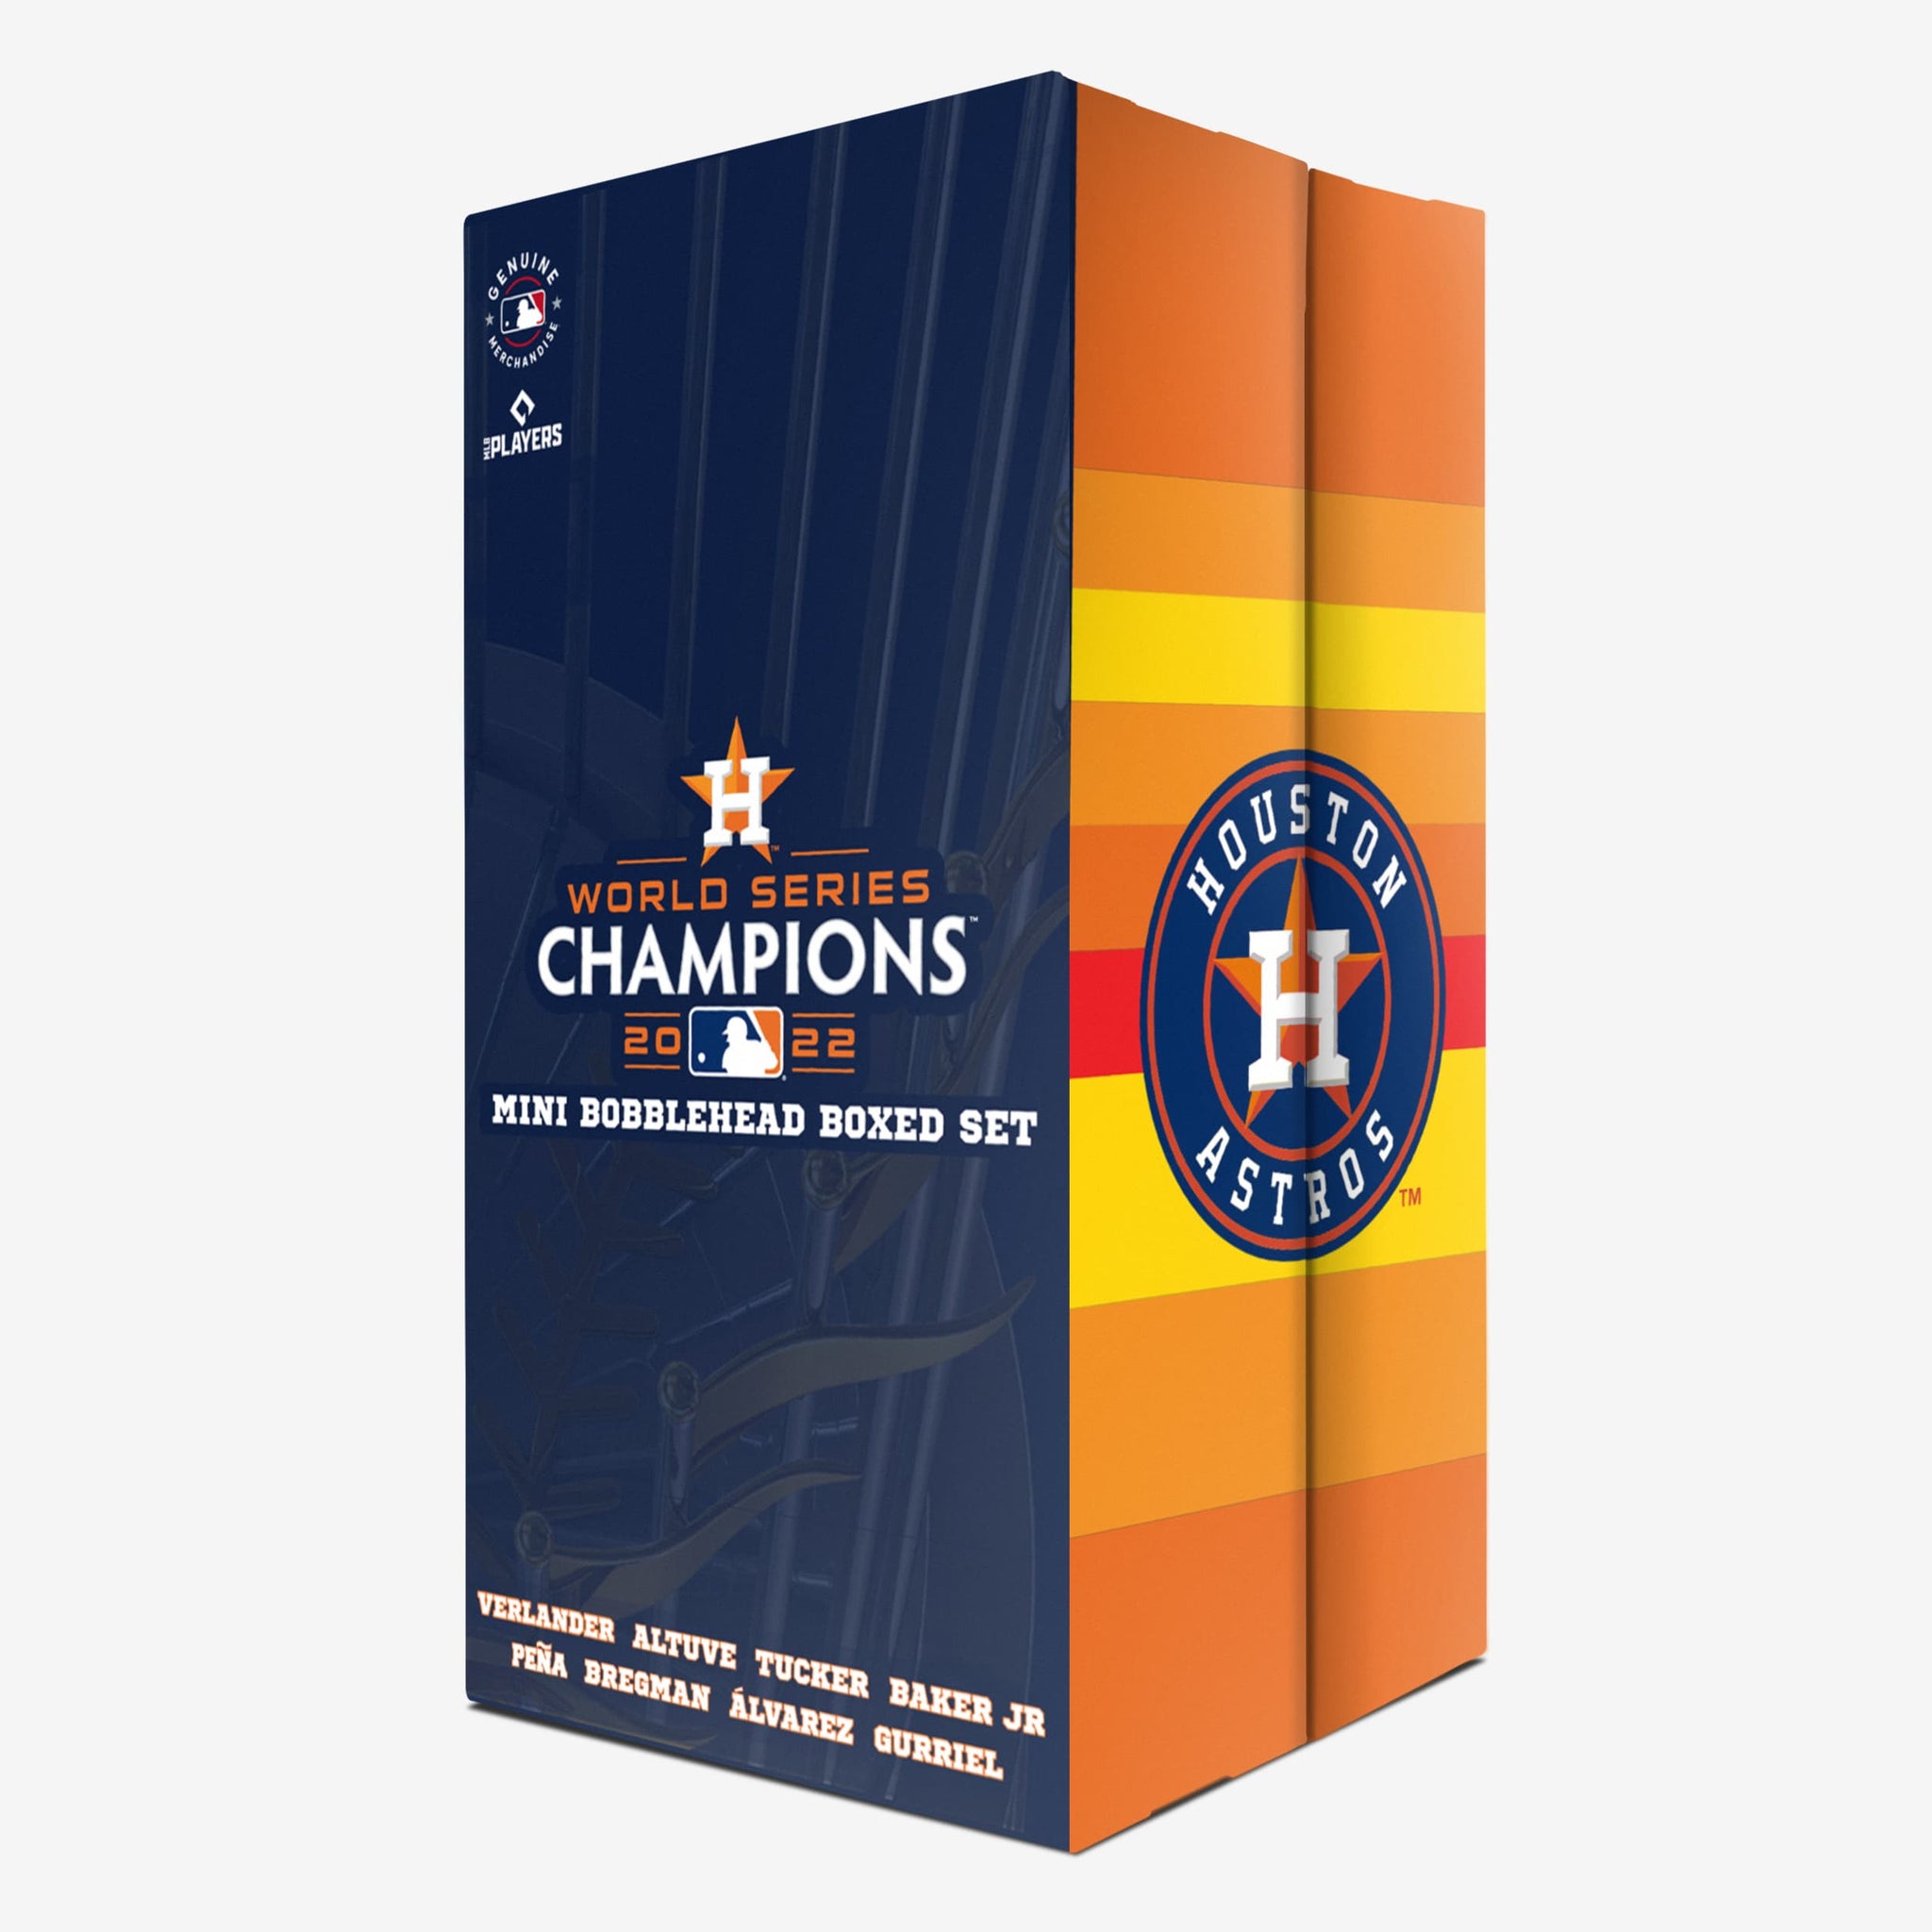 Yuli+Gurriel+Houston+Astros+2017+World+Series+Champions+Final+out+Bobblehead+MLB  for sale online